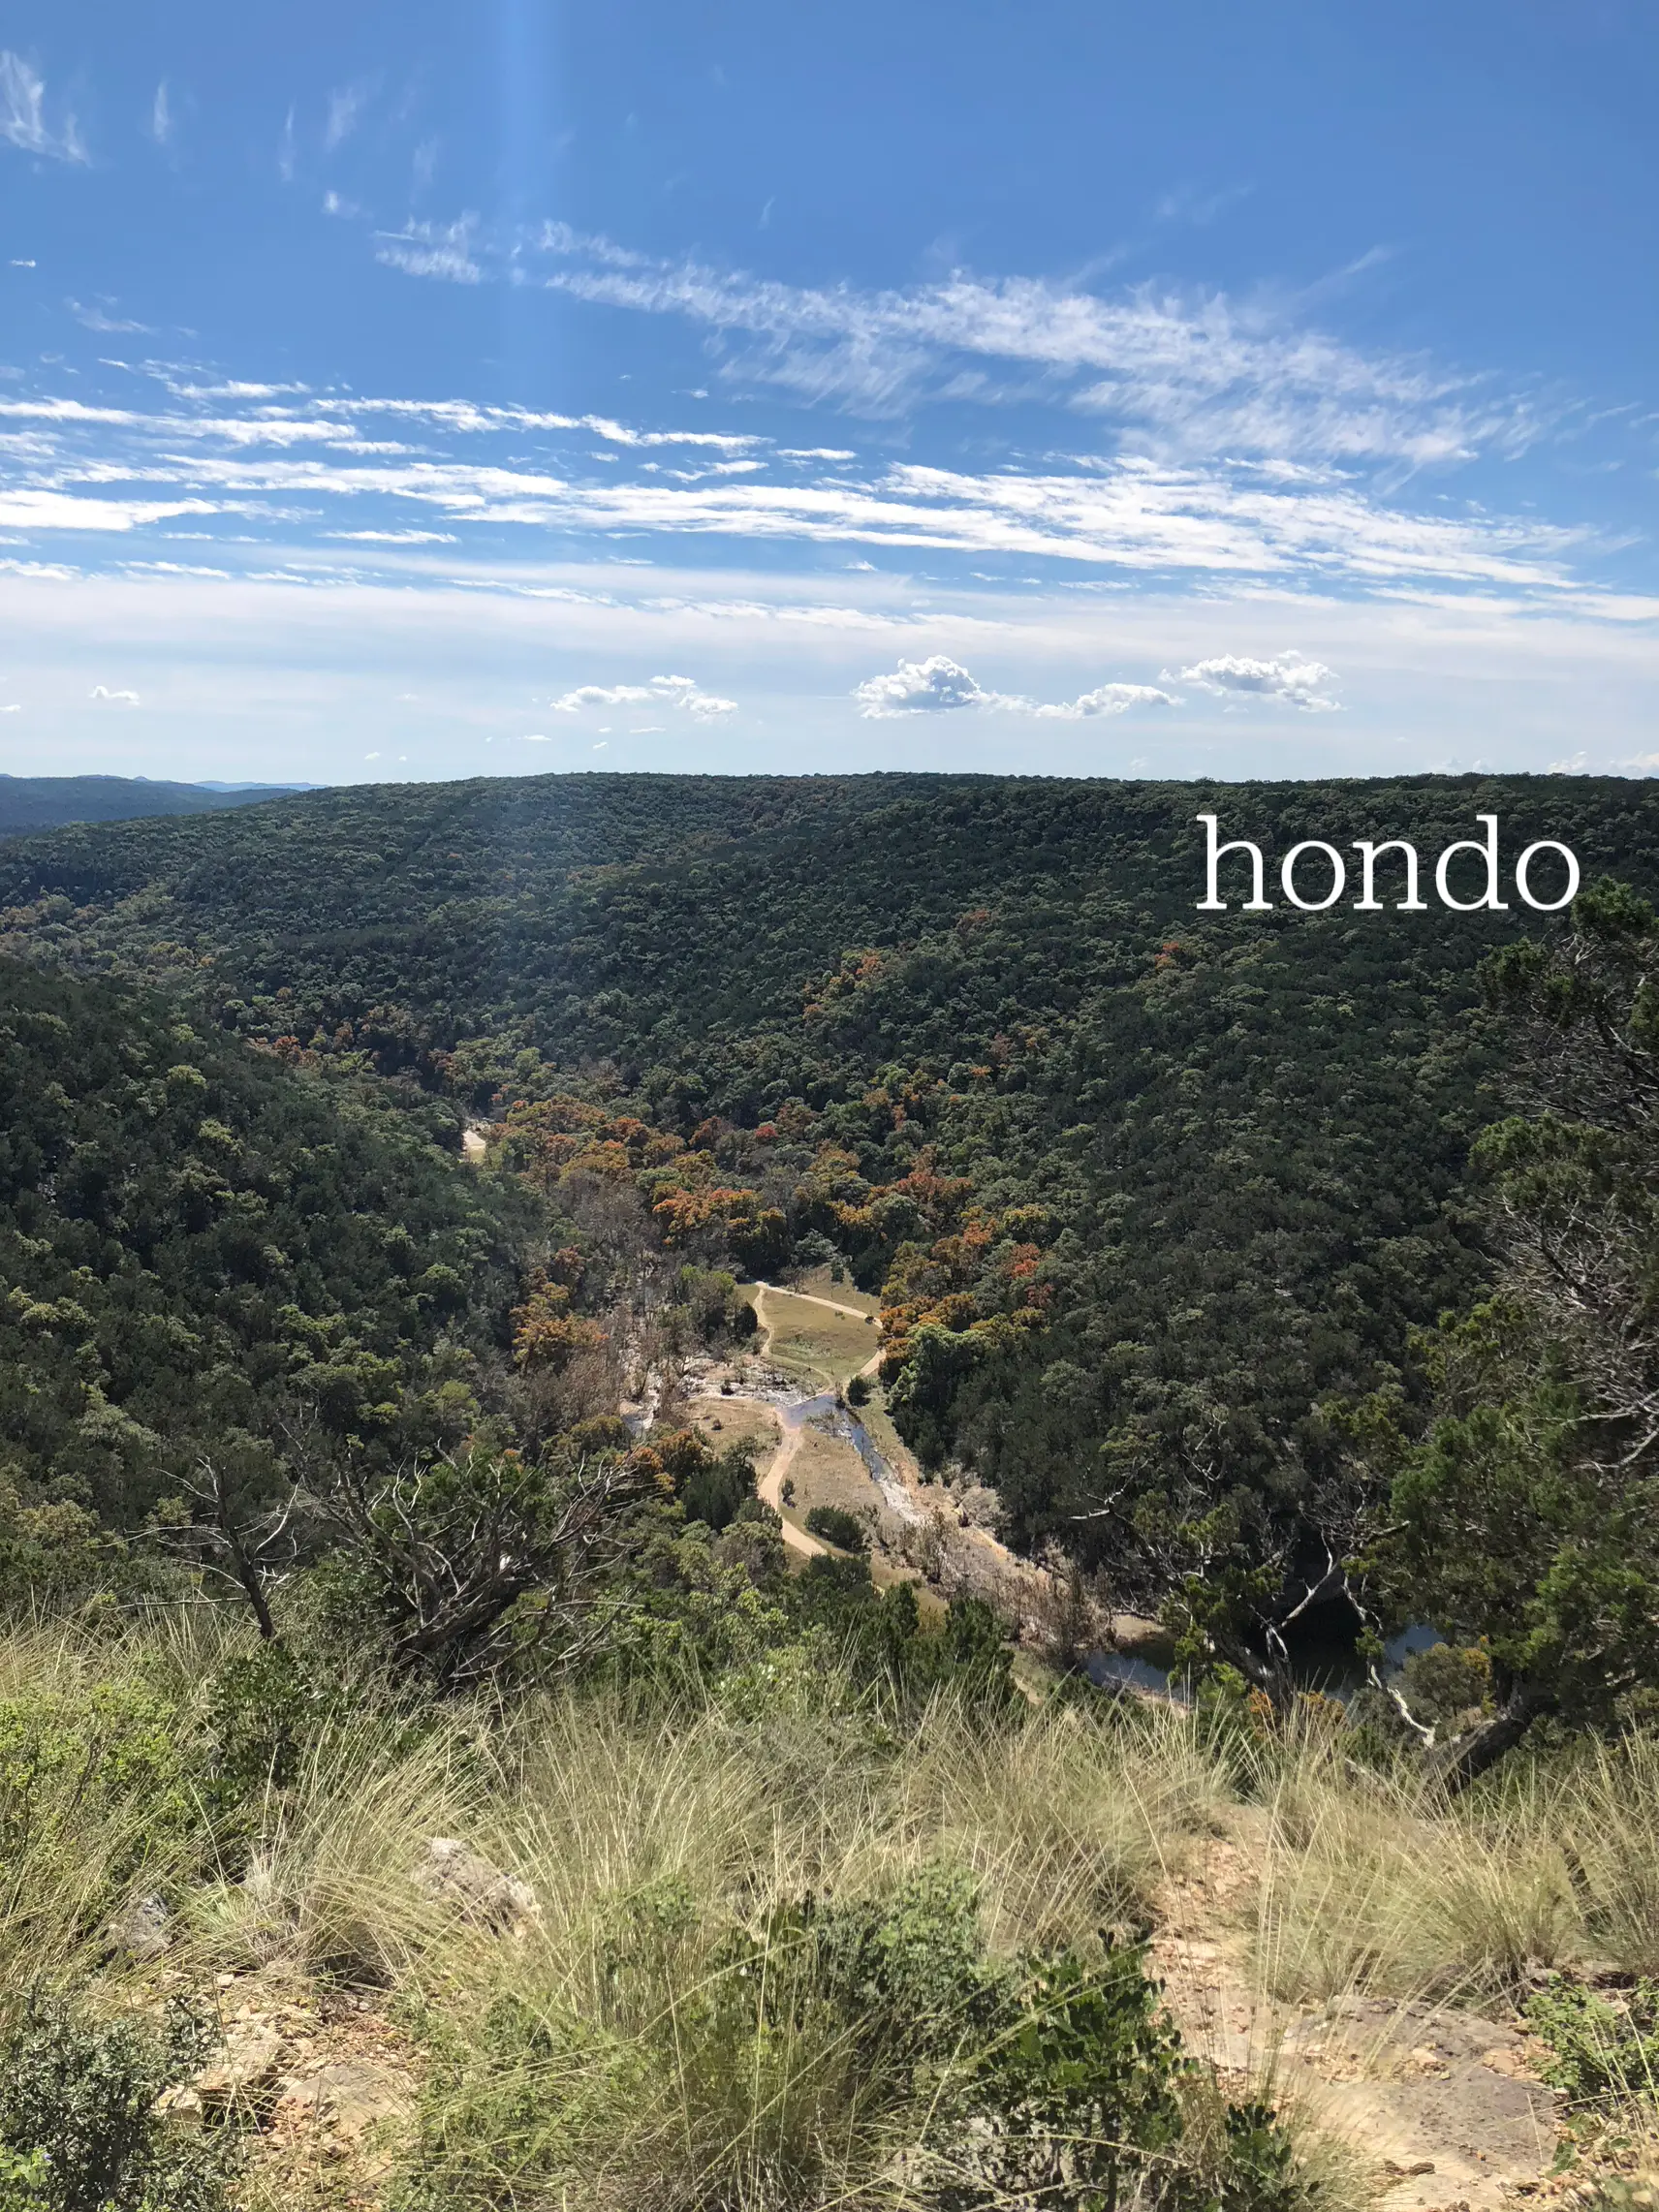  A mountain with a forest on top and the words "hondo 117" written on it.